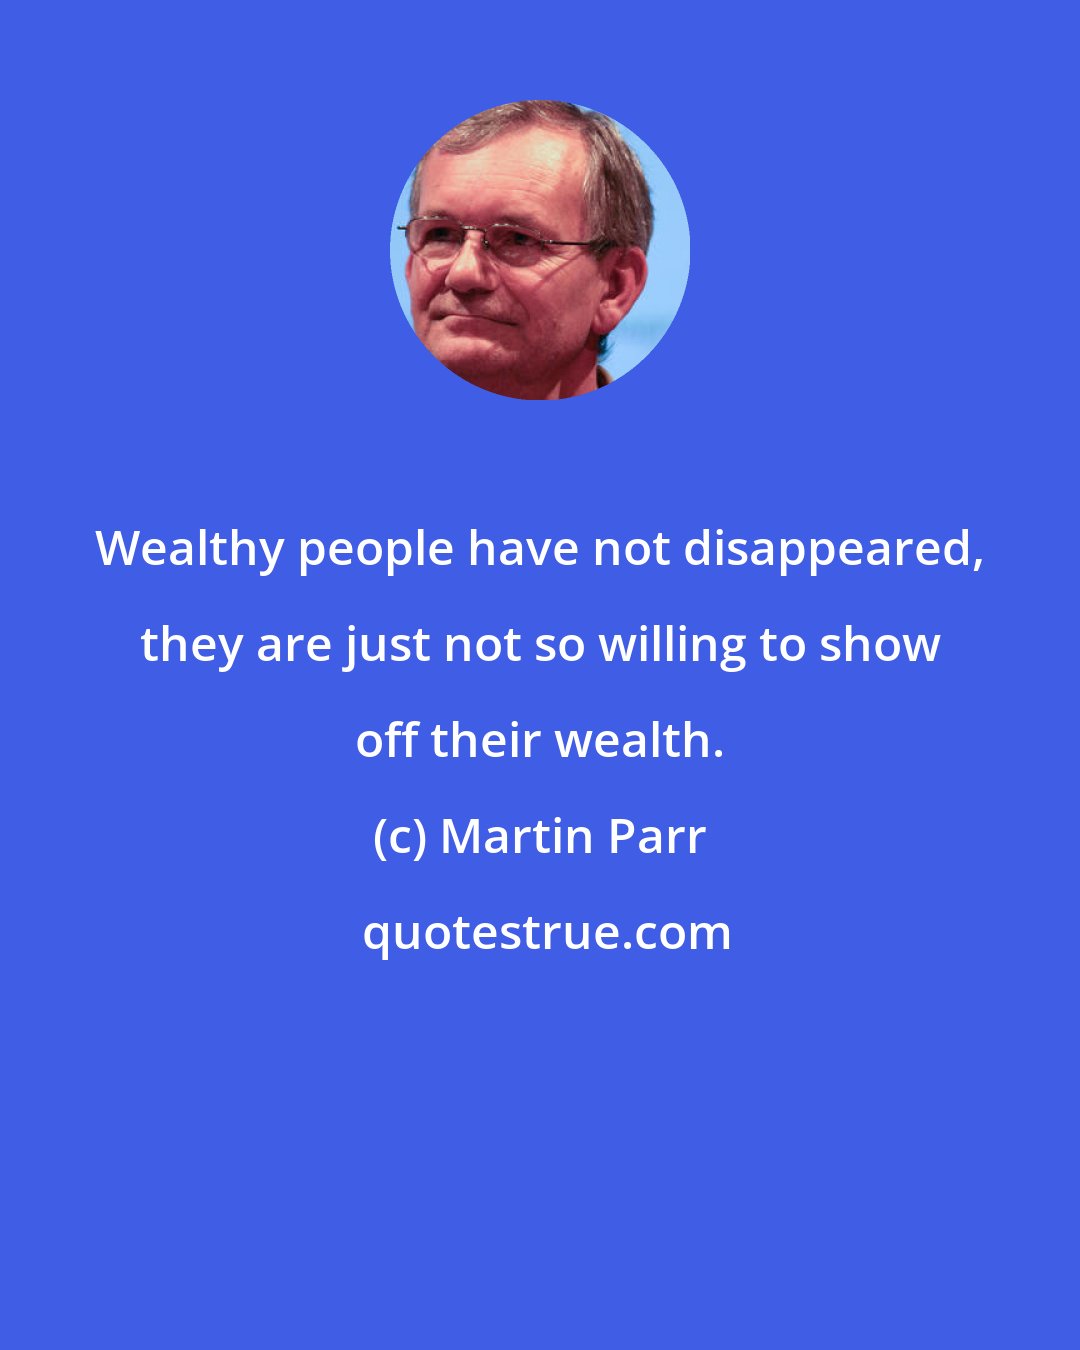 Martin Parr: Wealthy people have not disappeared, they are just not so willing to show off their wealth.